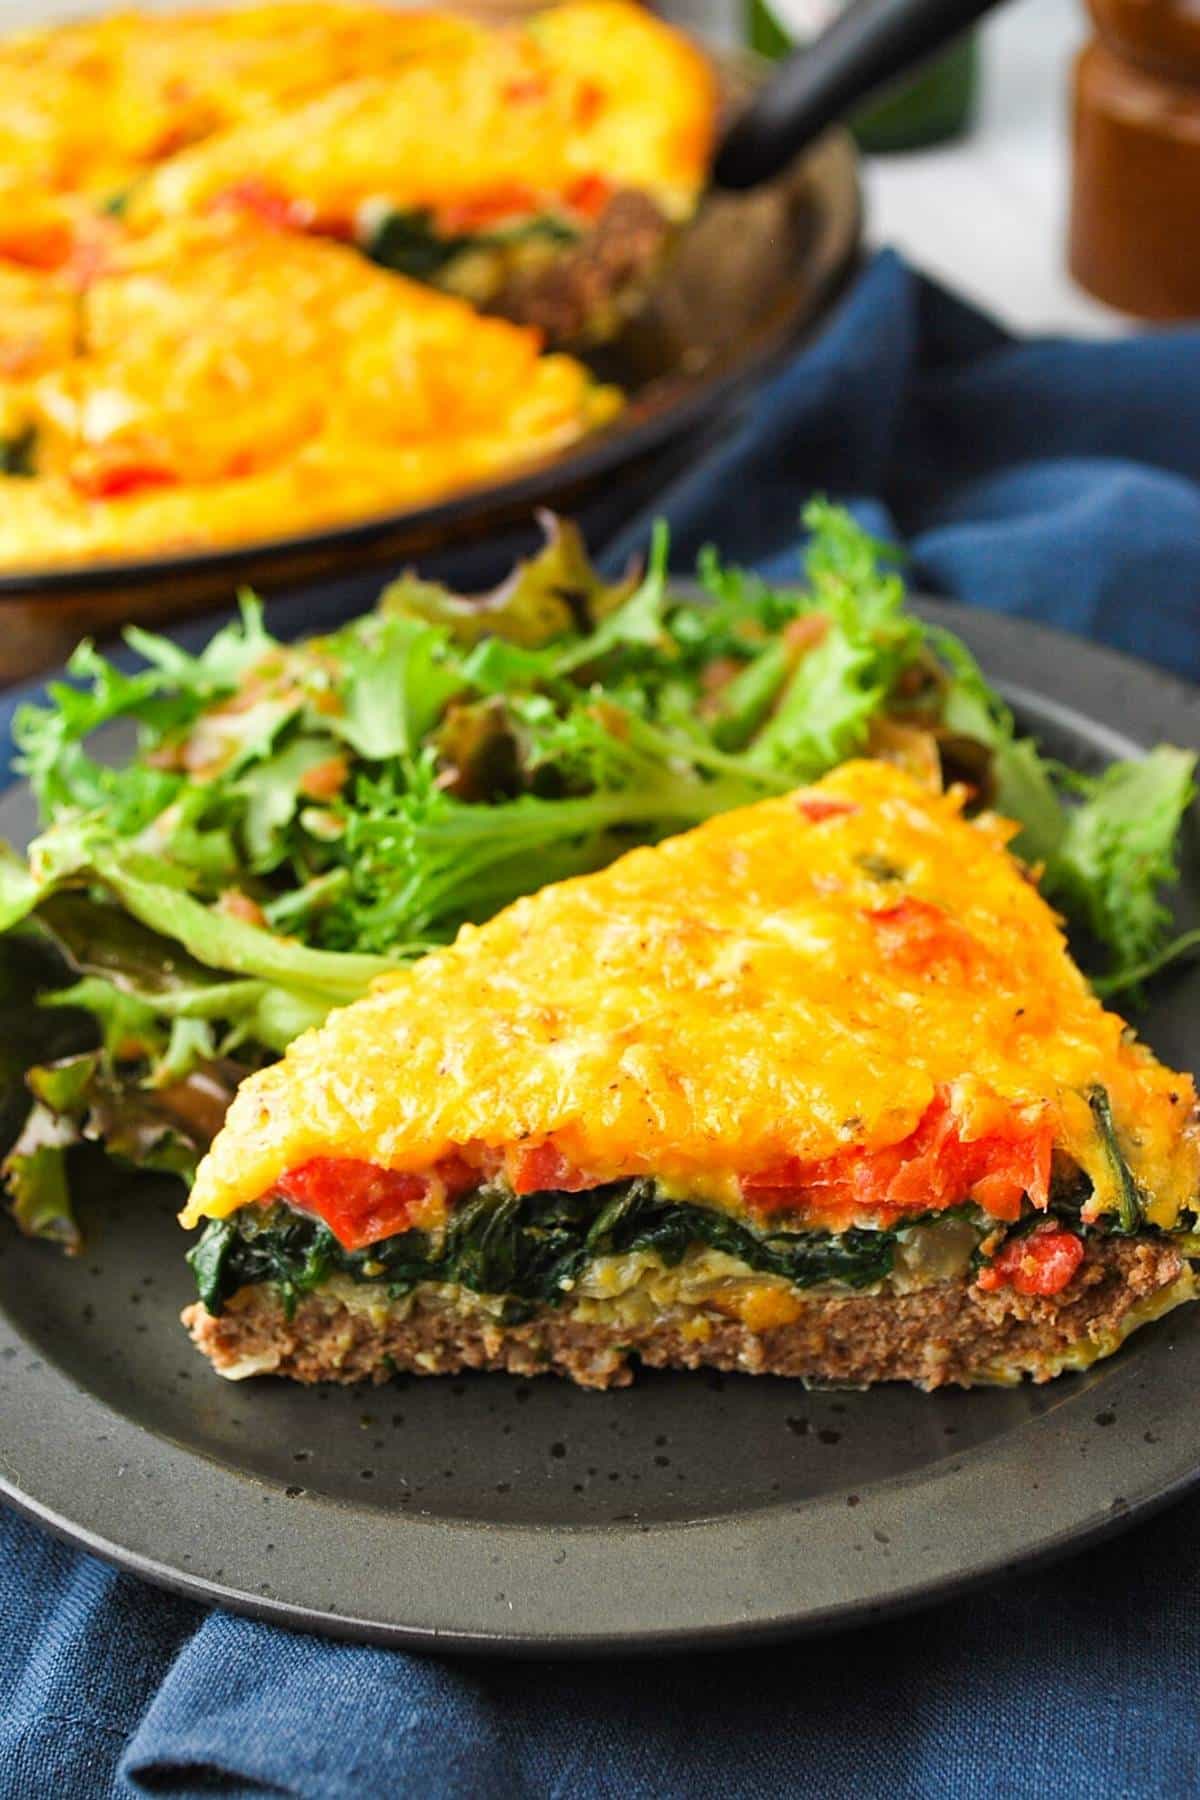 a slice of high protein quiche with salad greens on a plate